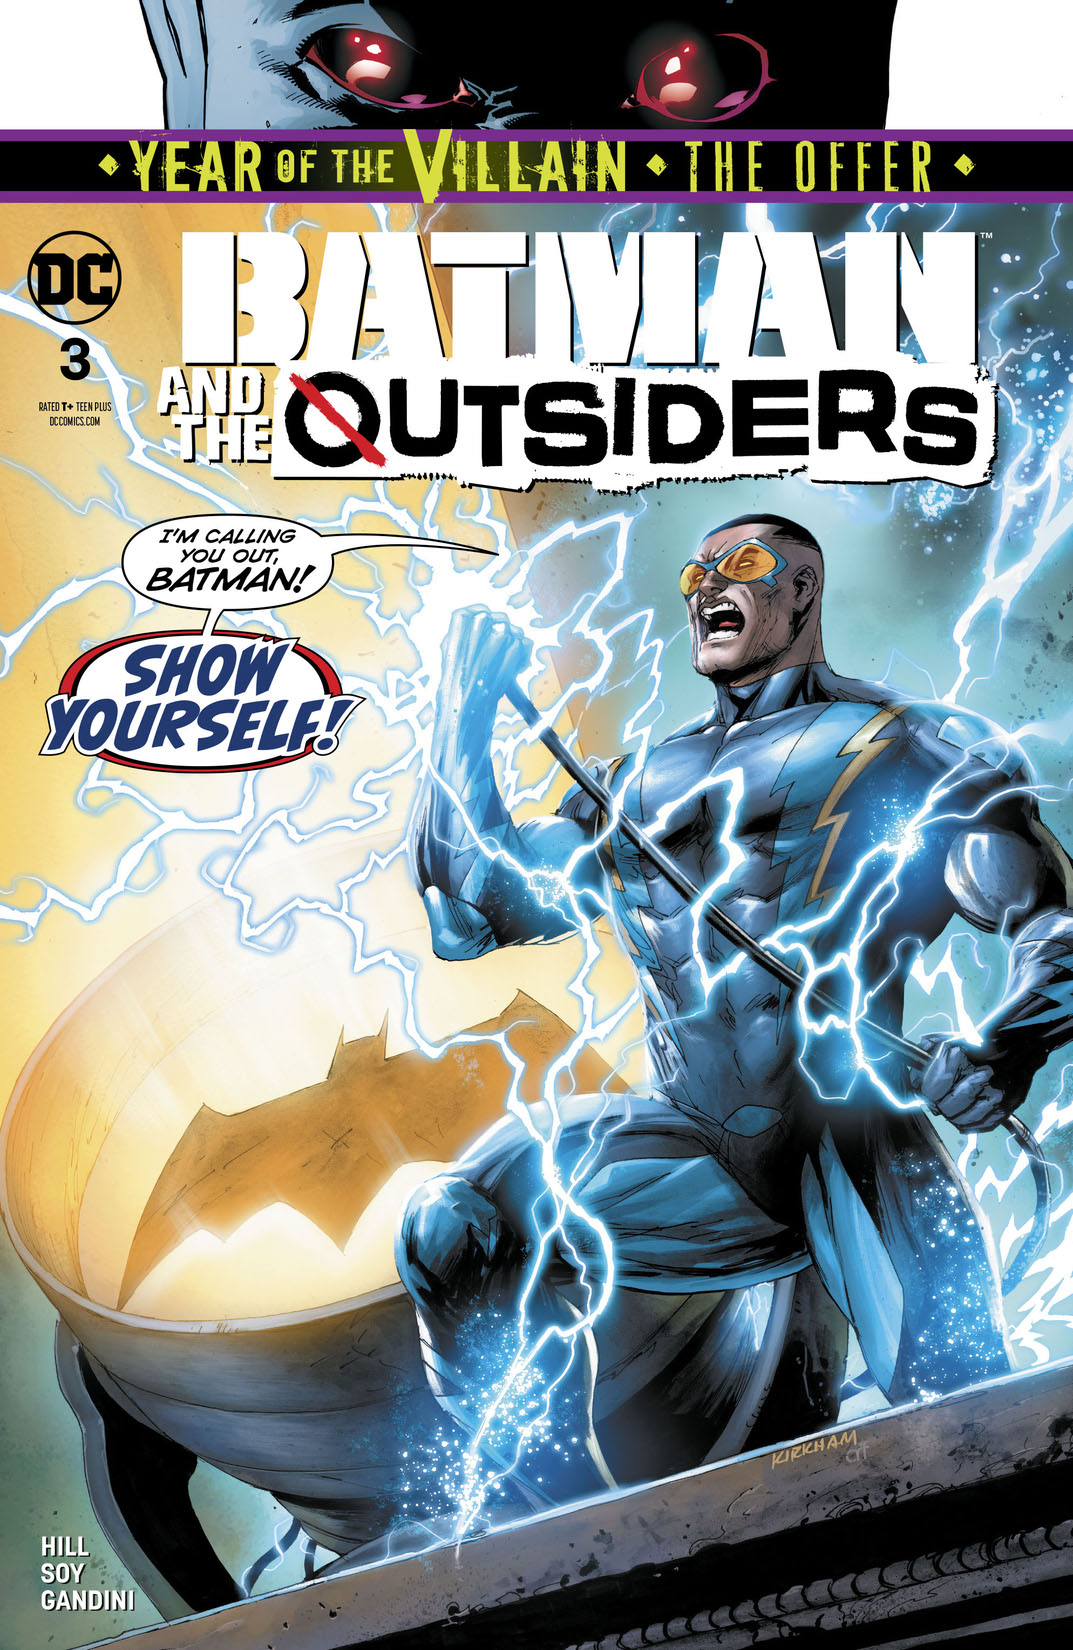 Batman & the Outsiders (2019-) #3 preview images